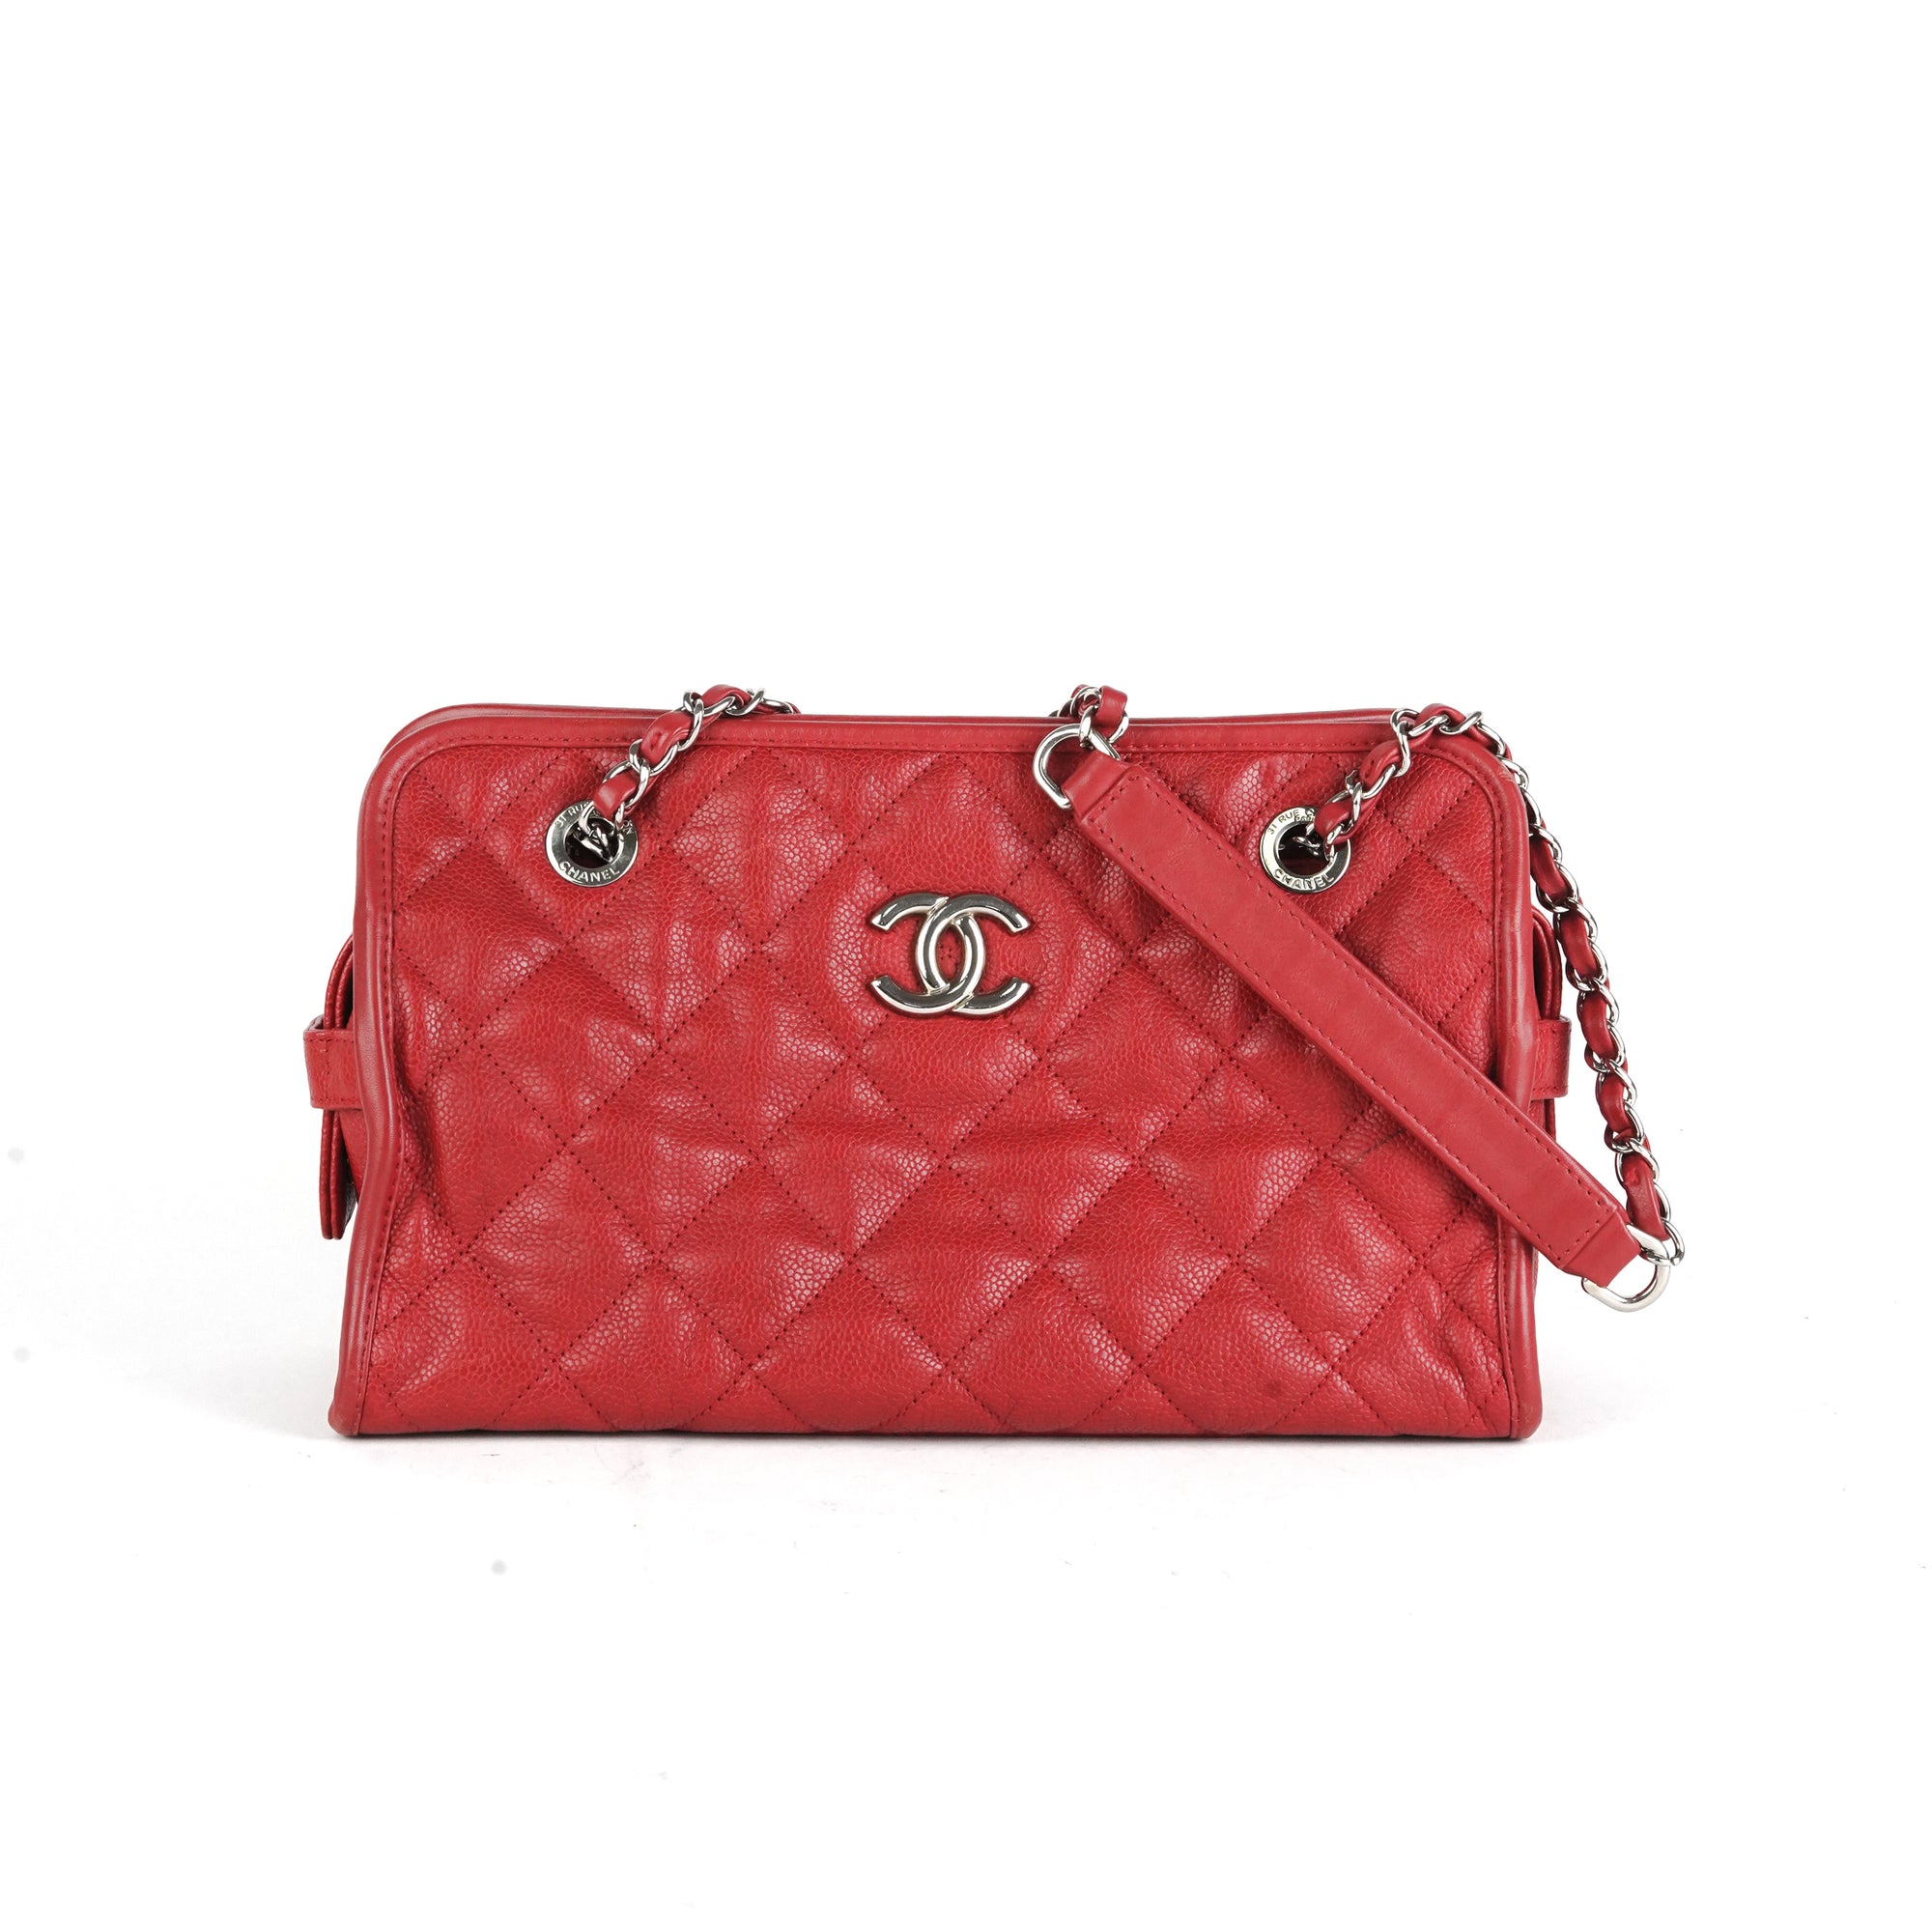 My small Chanel classic flap bag in red 3  Chanel bag red Chanel bag  Coco chanel bags